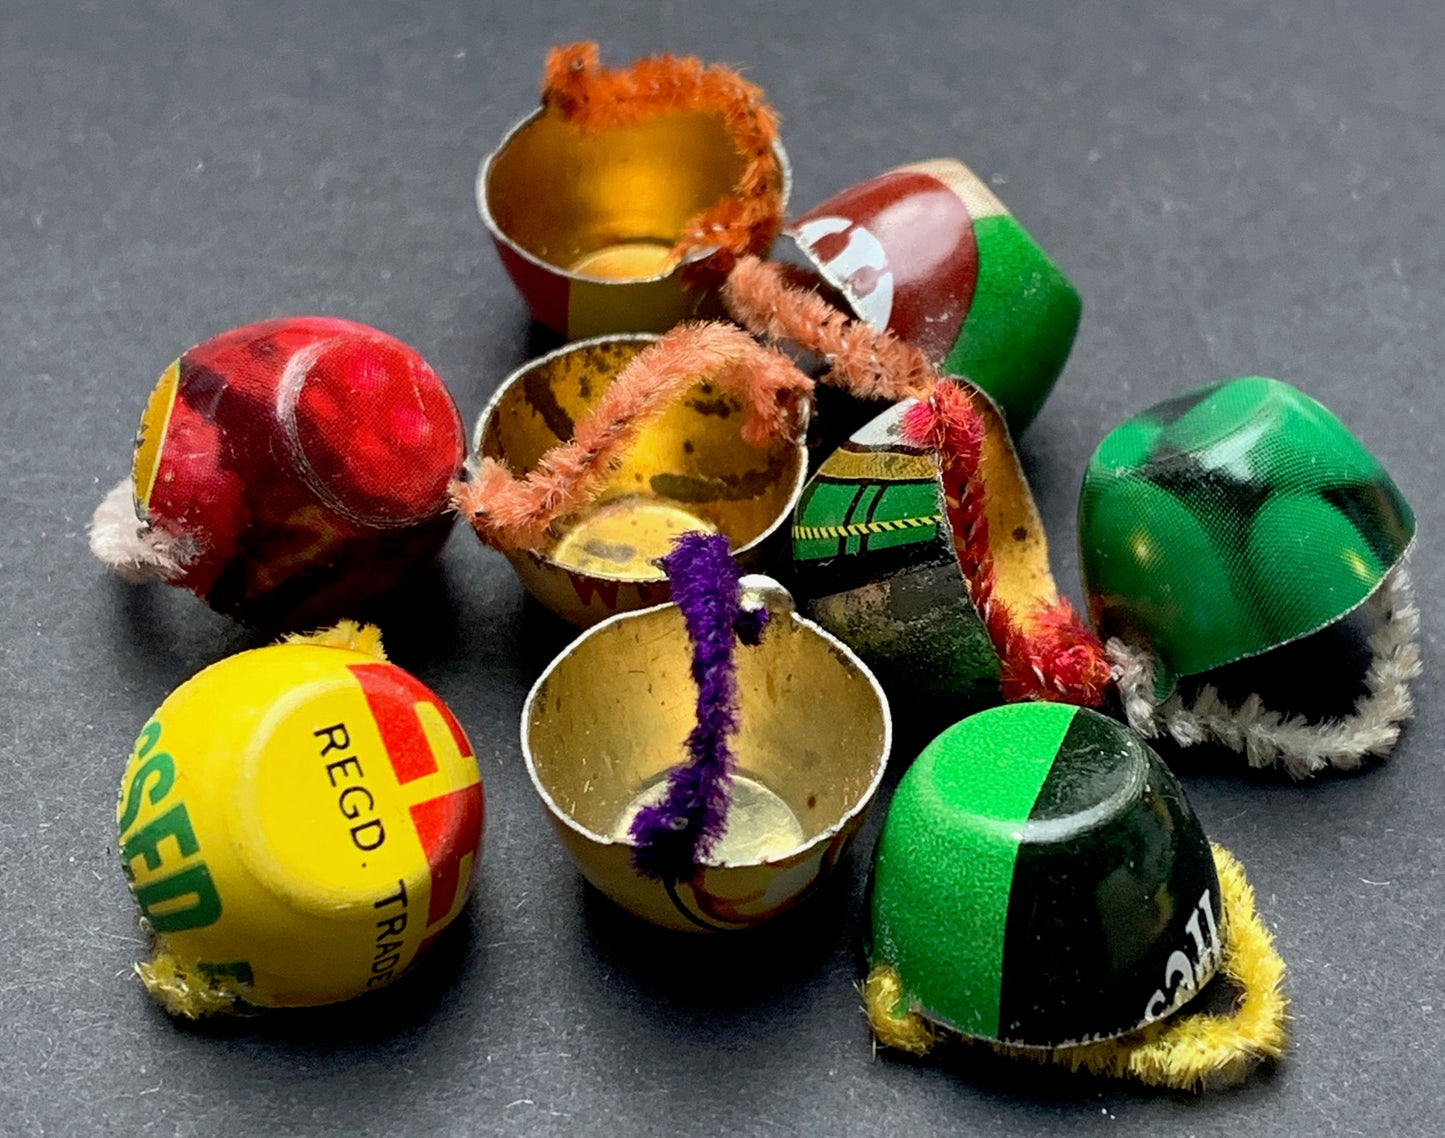 Early Recycling - 10 Tiny Tin Cups Made from Old Tin Cans